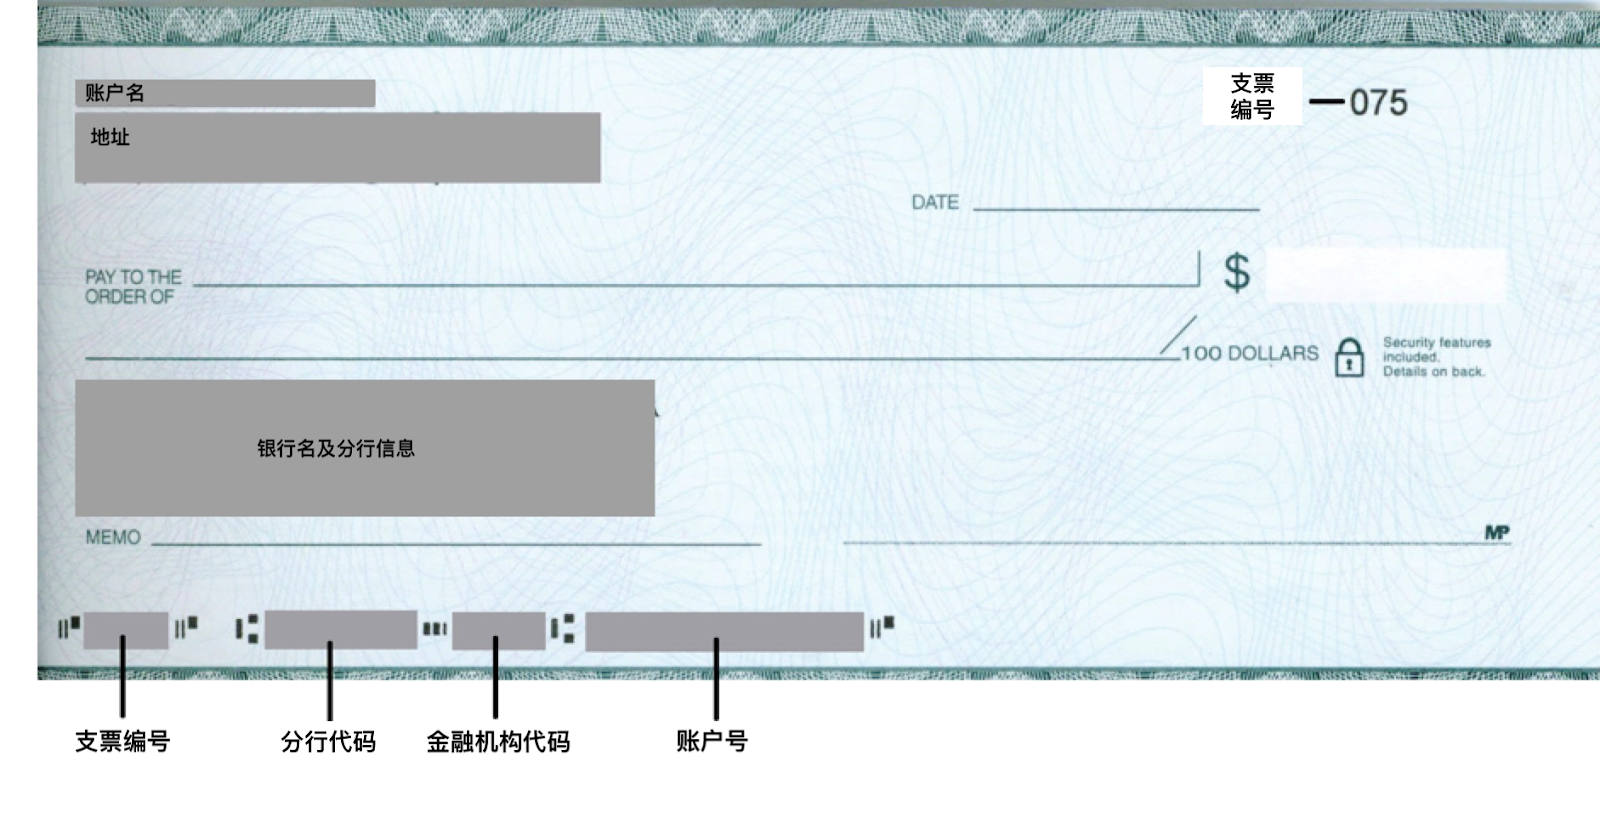 Cheque_CN.png